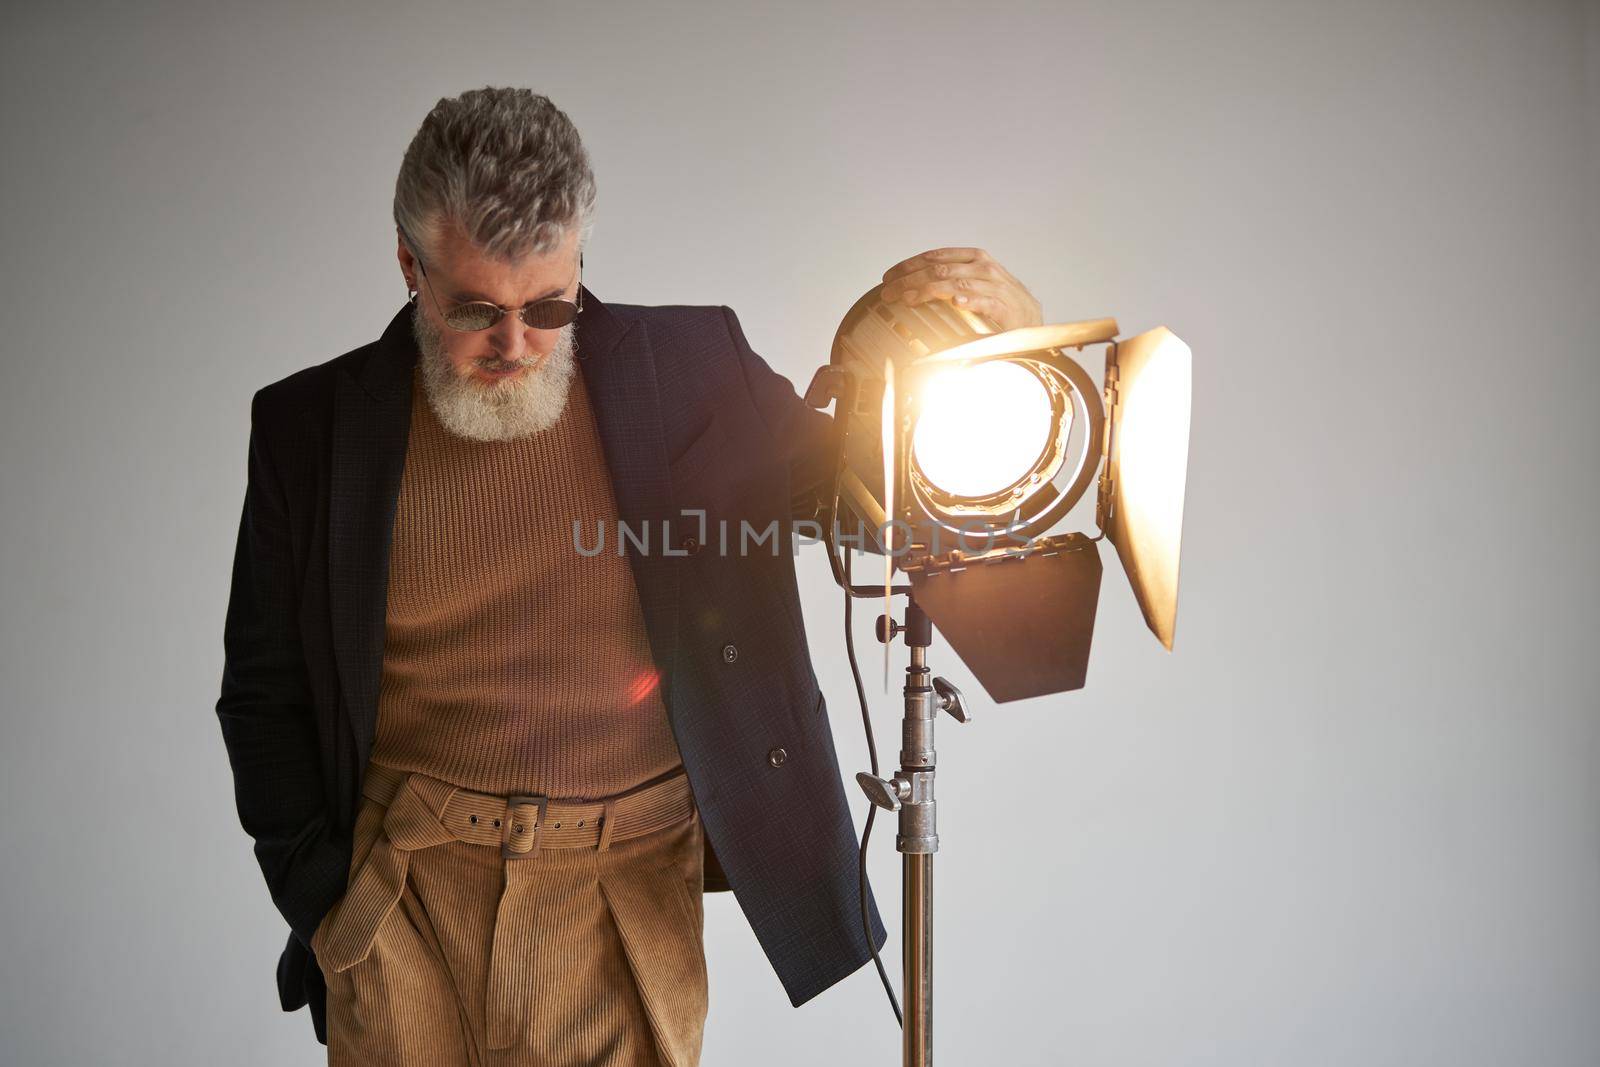 Portrait of classy bearded middle aged man dressed elegantly standing next to studio spotlight while posing for camera over white background. Fashion photoshoot, style concept